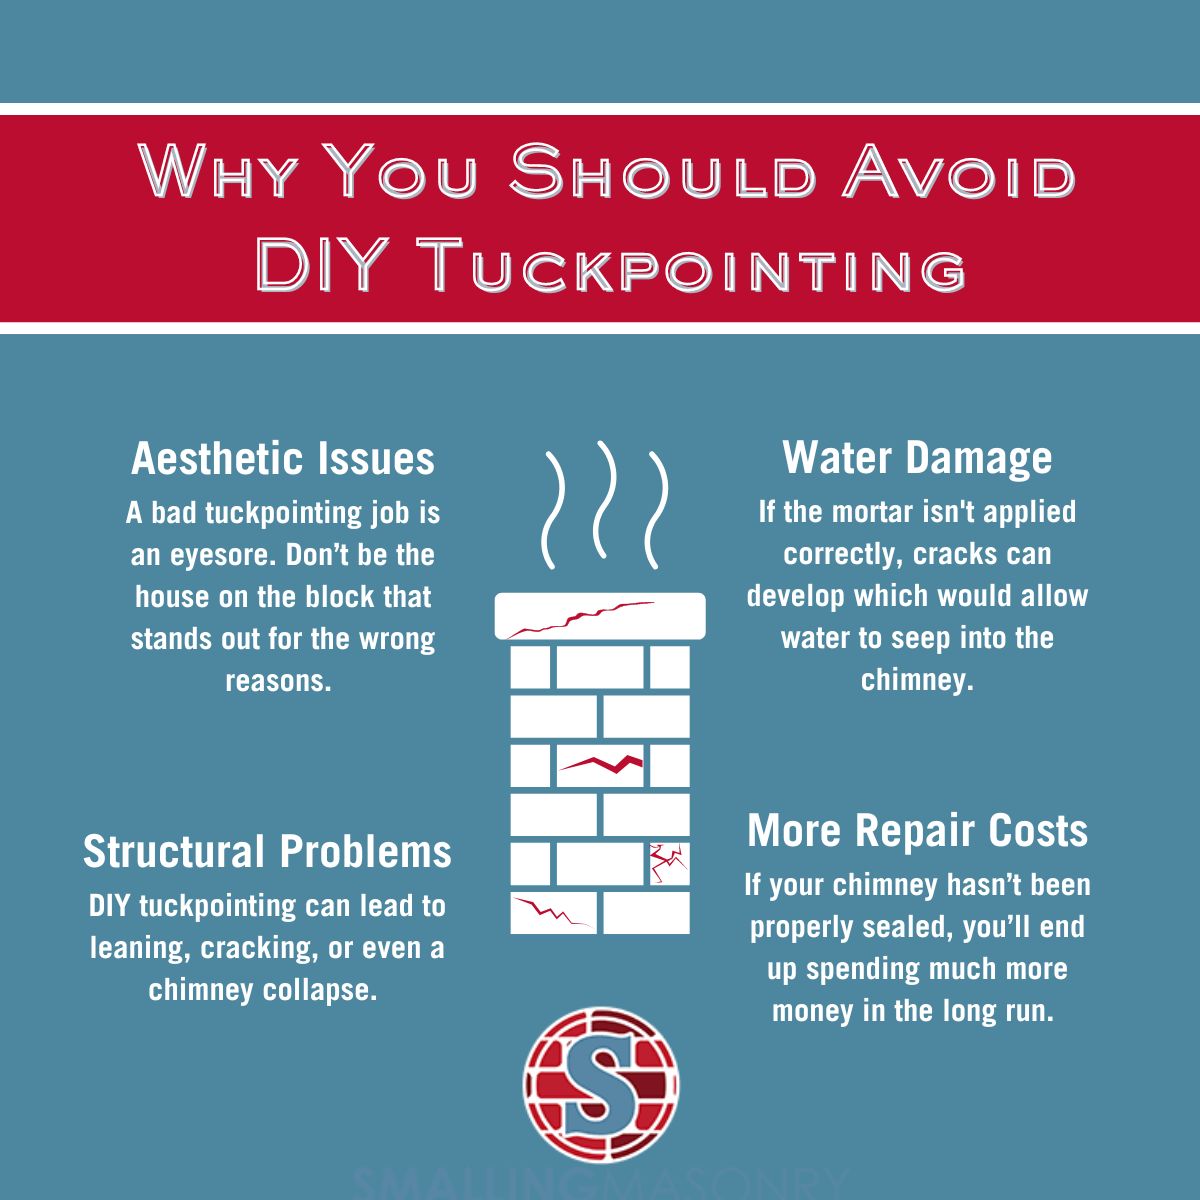 original infographic explaining why you should avoid DIY tuckpointing